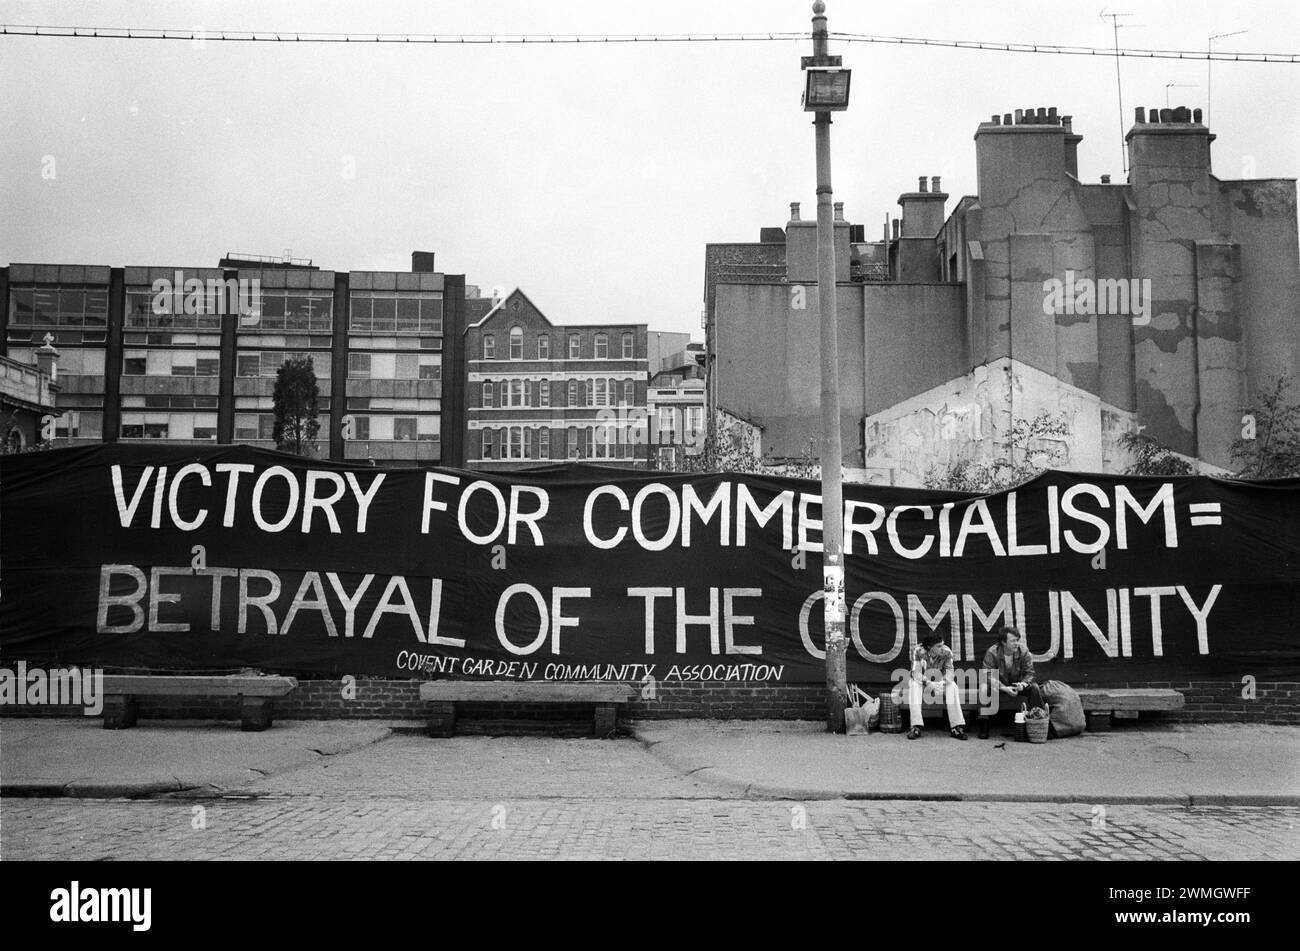 Opening of the new Covent Garden Piazza 1980s. The Covent Garden Community Association (CGCA) fought against the commercialism of this central part of London. Their banner, ‘Victory for Commercialism Betrayal of the Community’.  Covent Garden Piazza was opened by Sir Horace Cutler on 19th June 1980. UK HOMER SYKES Stock Photo